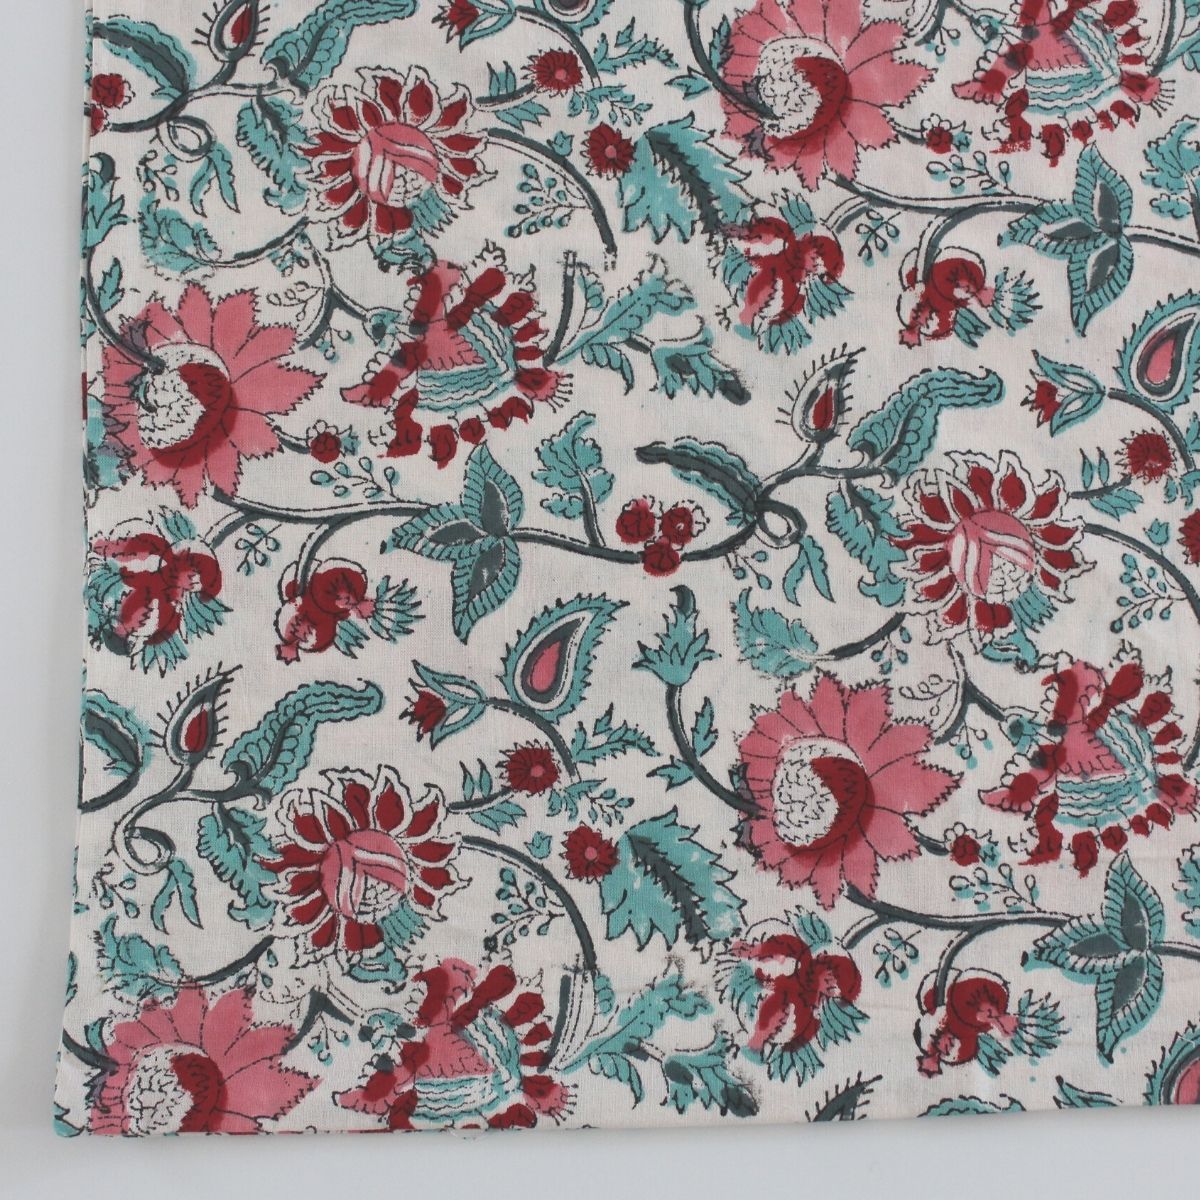 Pink and blue floral cushion cover